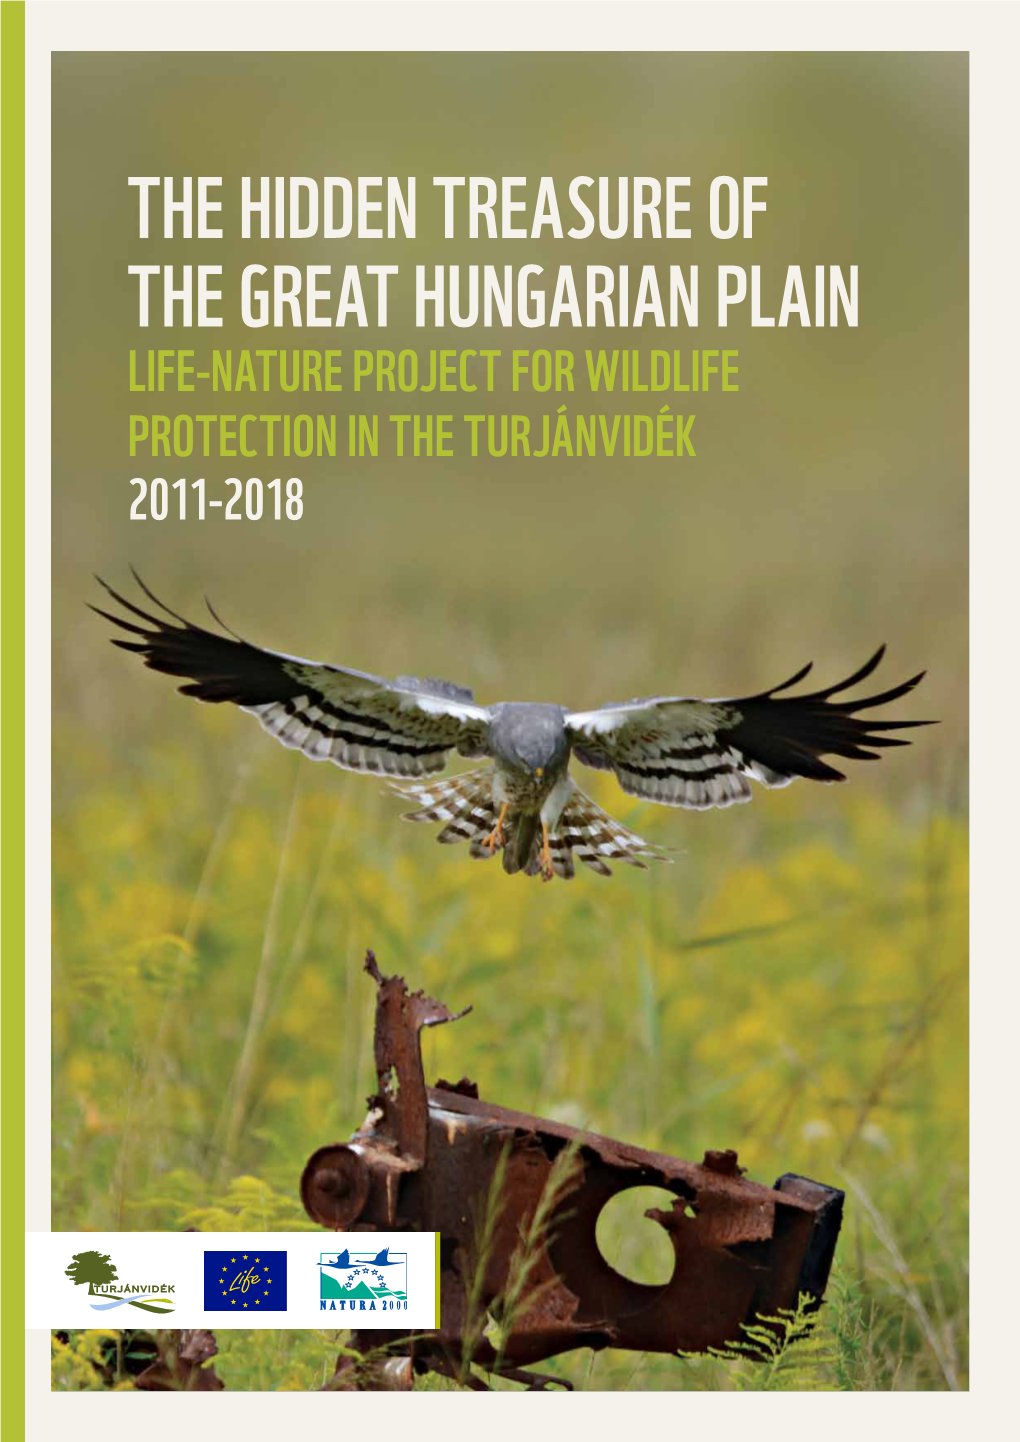 The Hidden Treasure of the Great Hungarian Plain Life-Nature Project for Wildlife Protection in the Turjánvidék 2011-2018